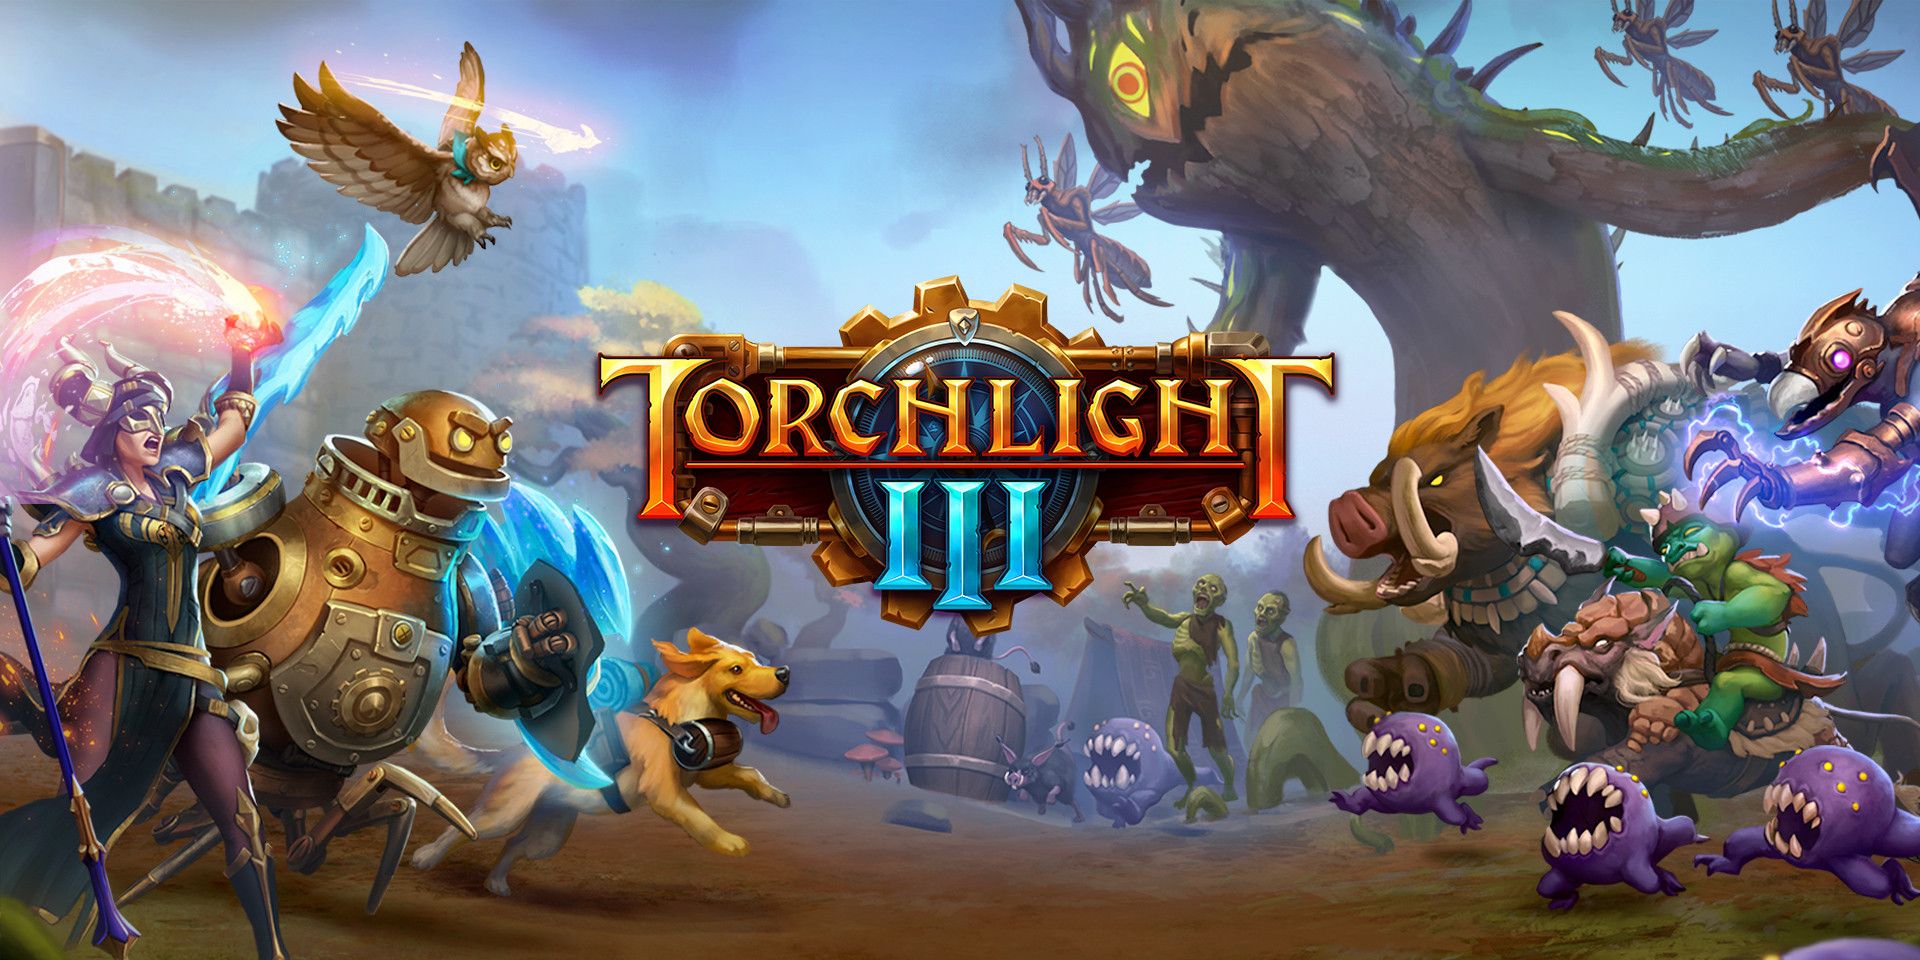 torchlight 3 heroes and monsters with title